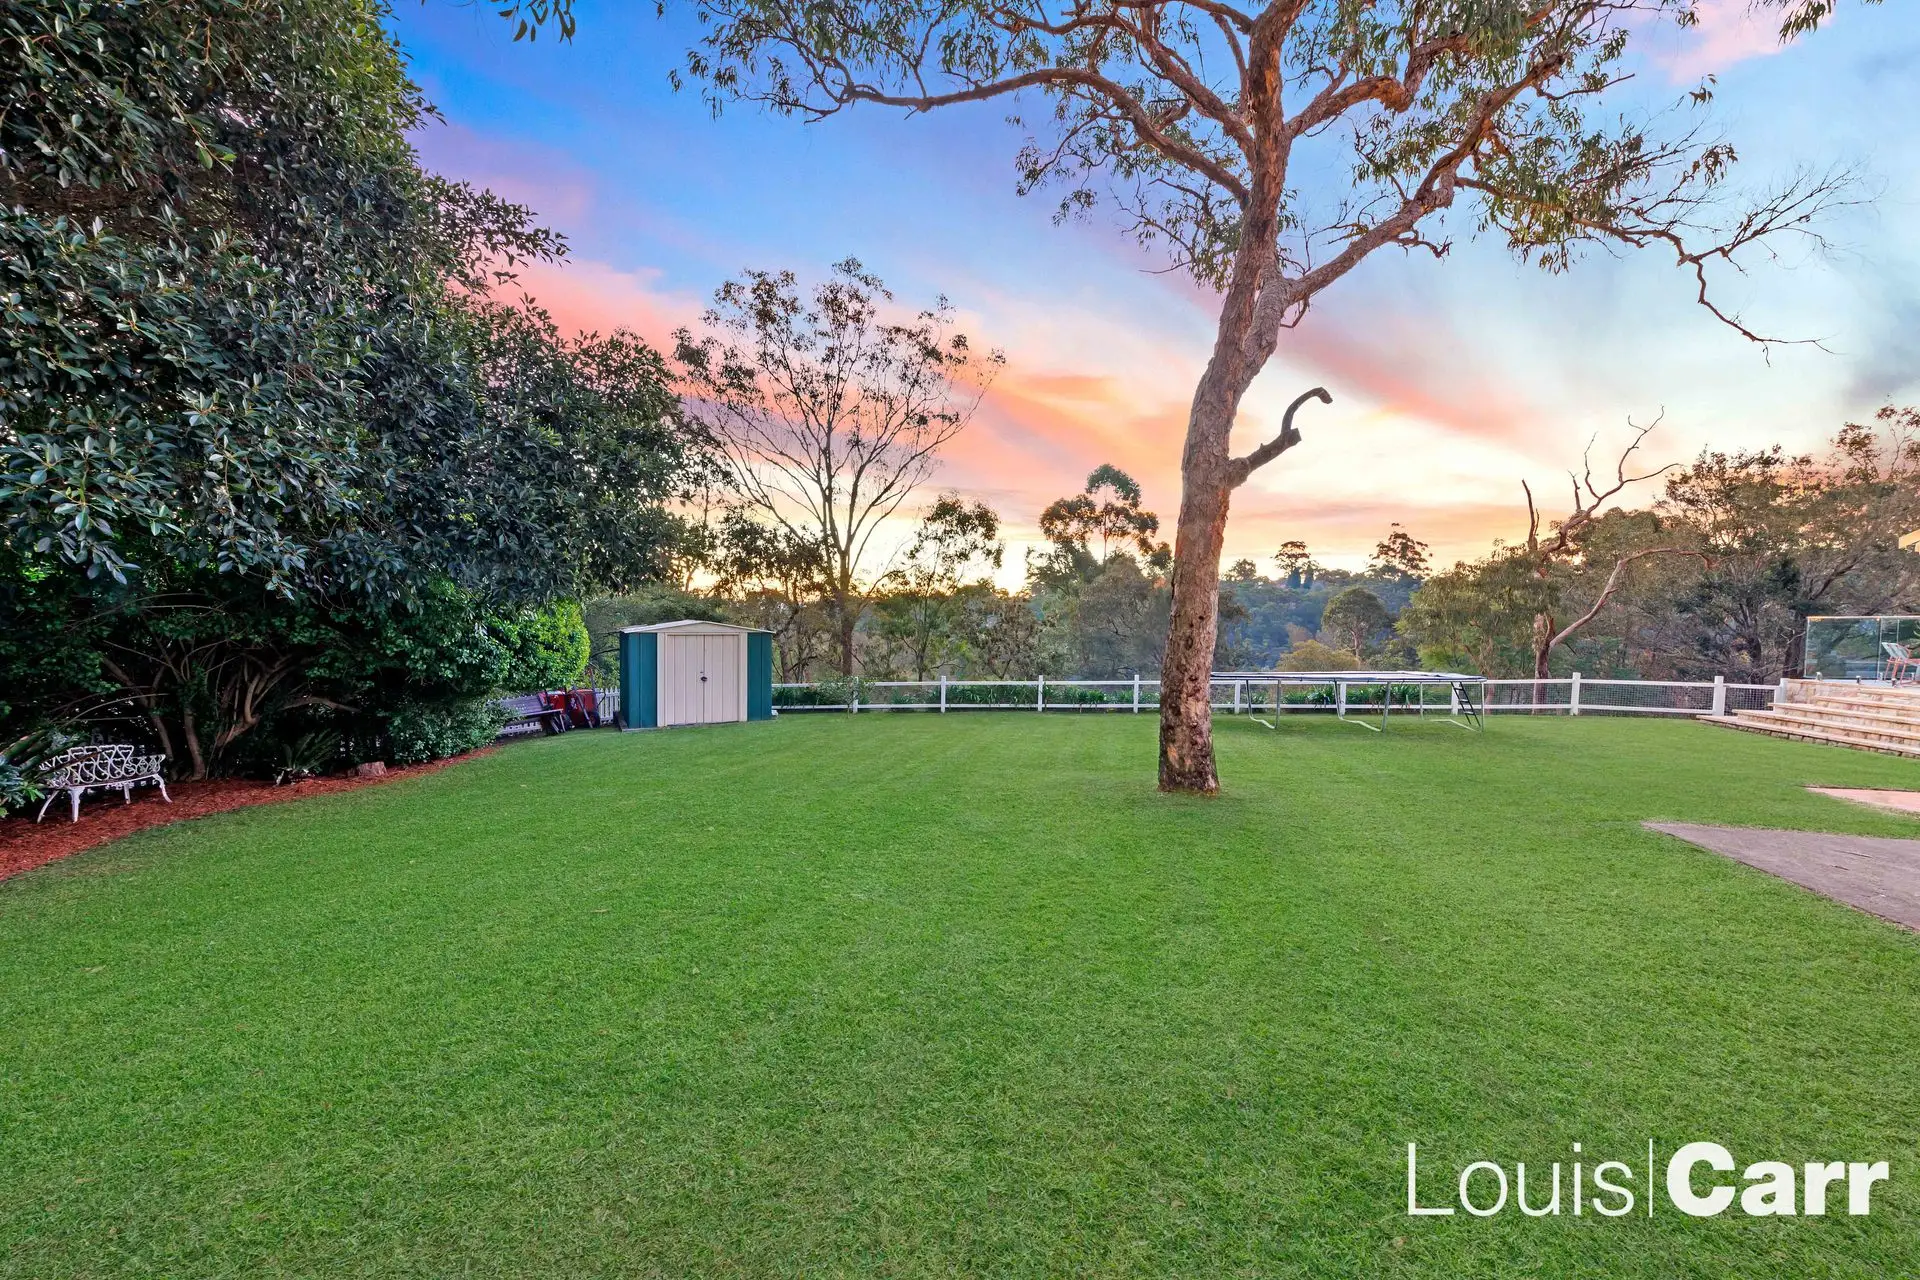 Photo #16: 9 Araluen Place, Glenhaven - Sold by Louis Carr Real Estate